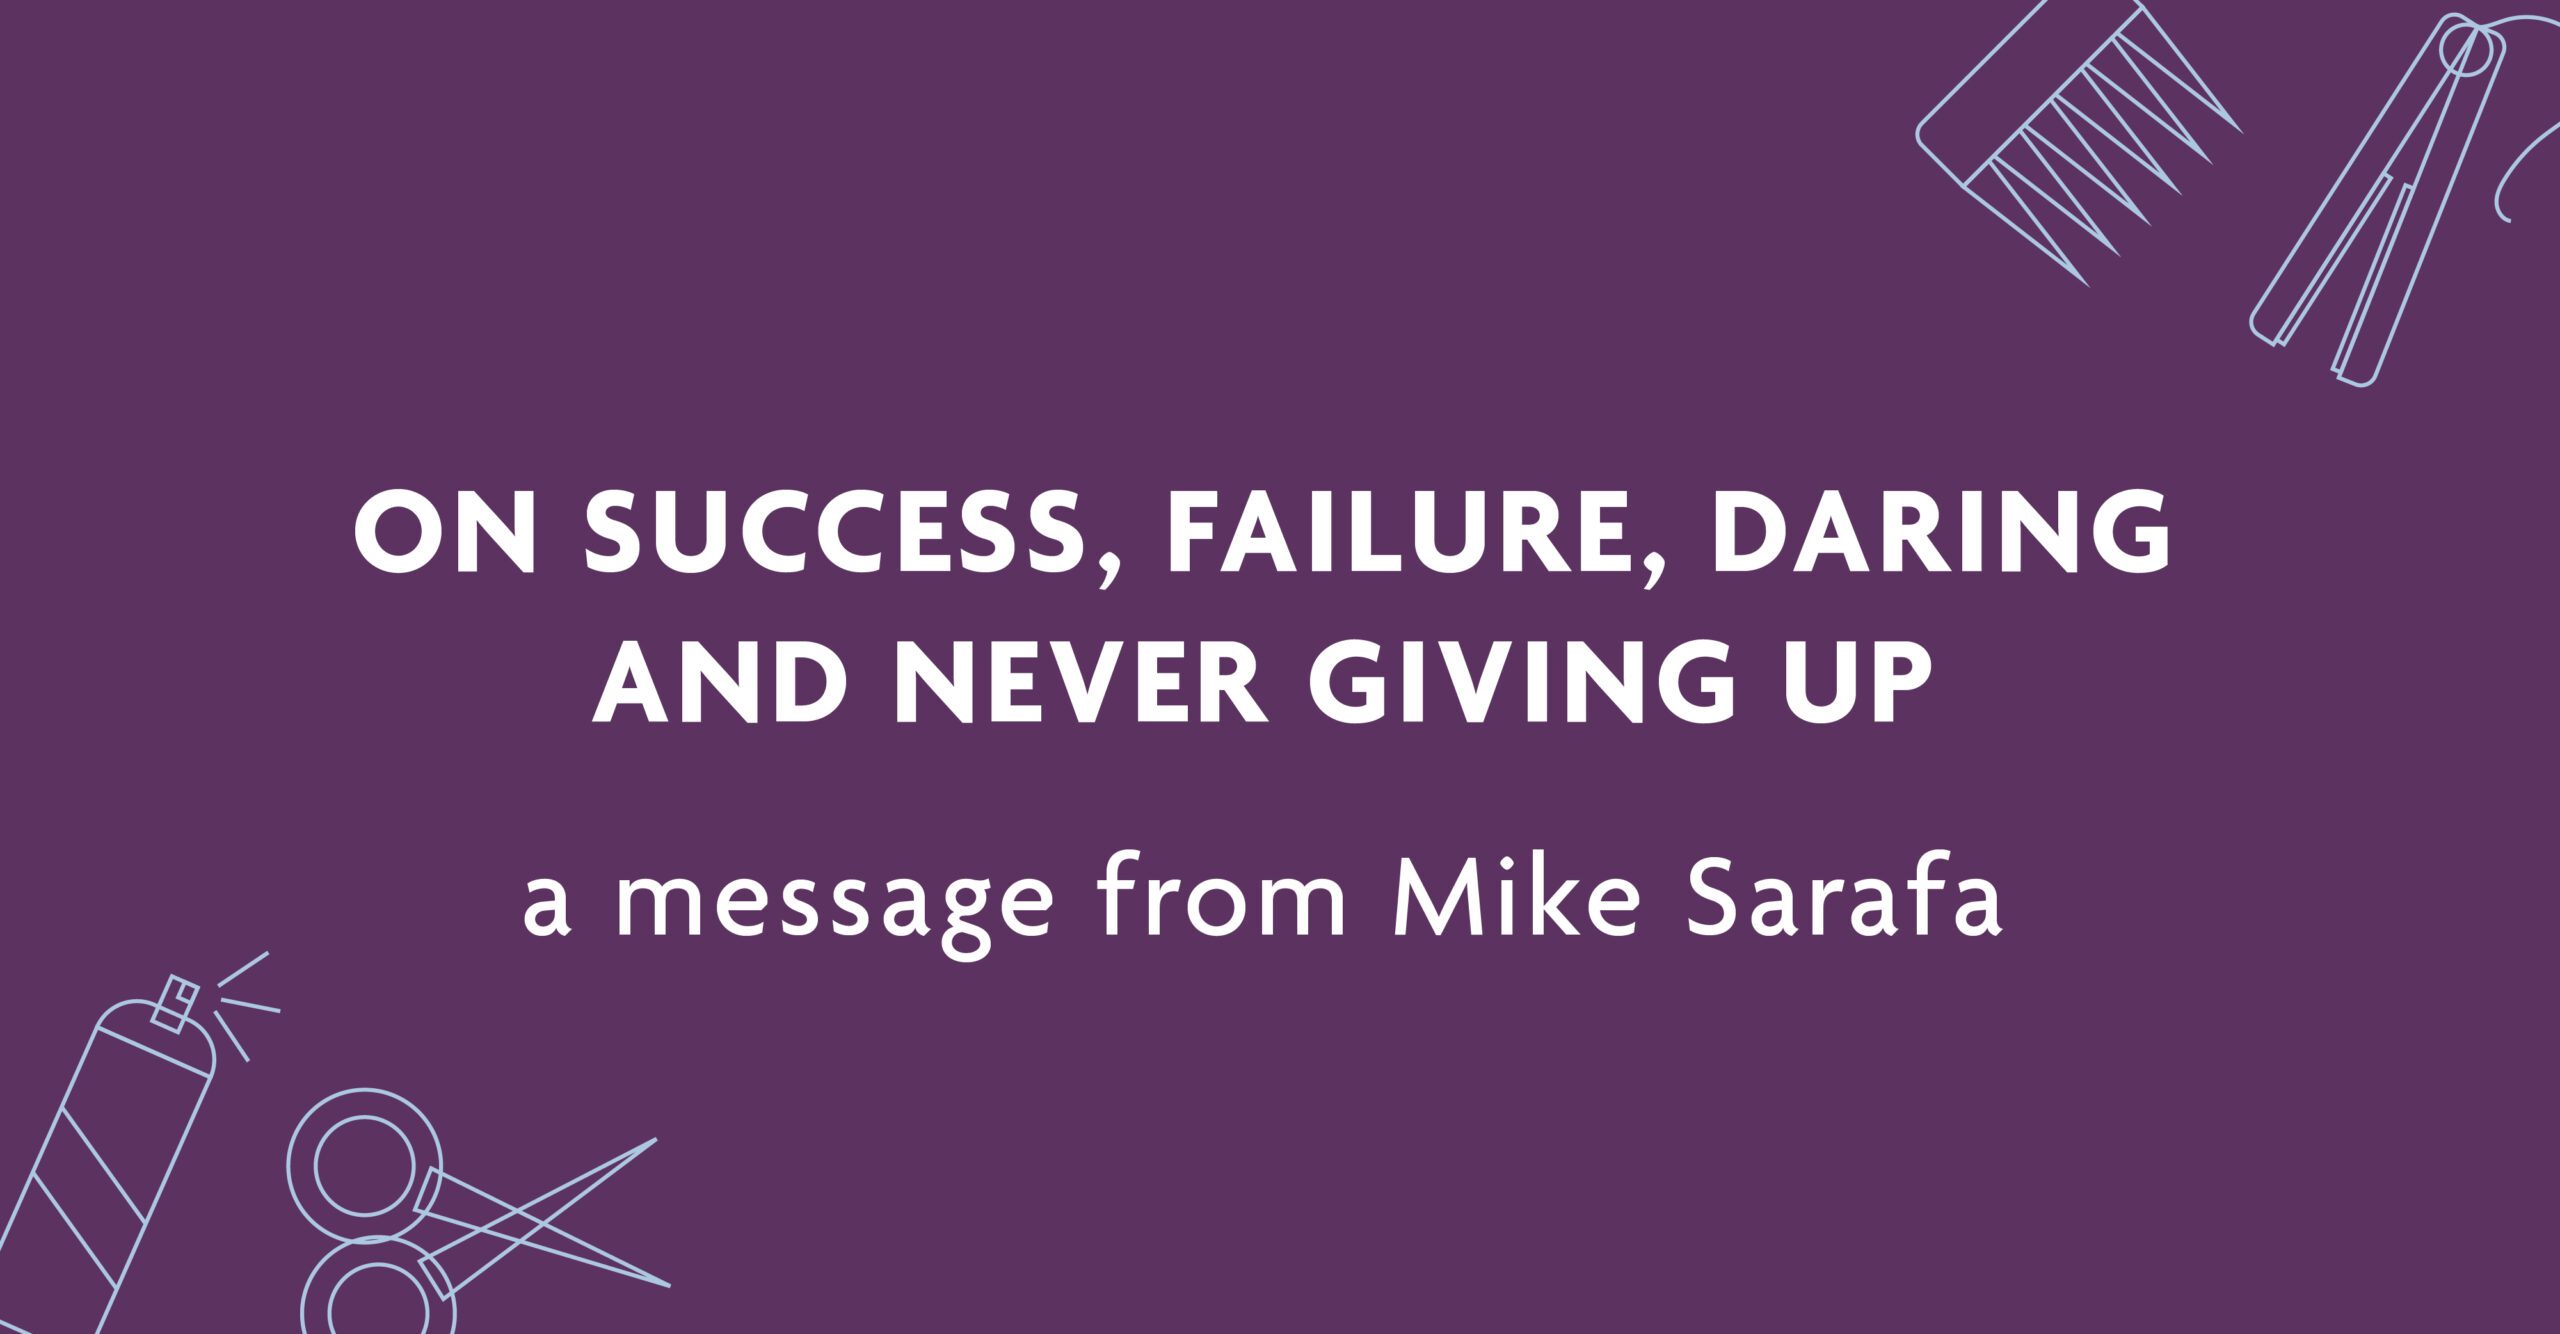 On Success, Failure, Daring and Never Giving Up